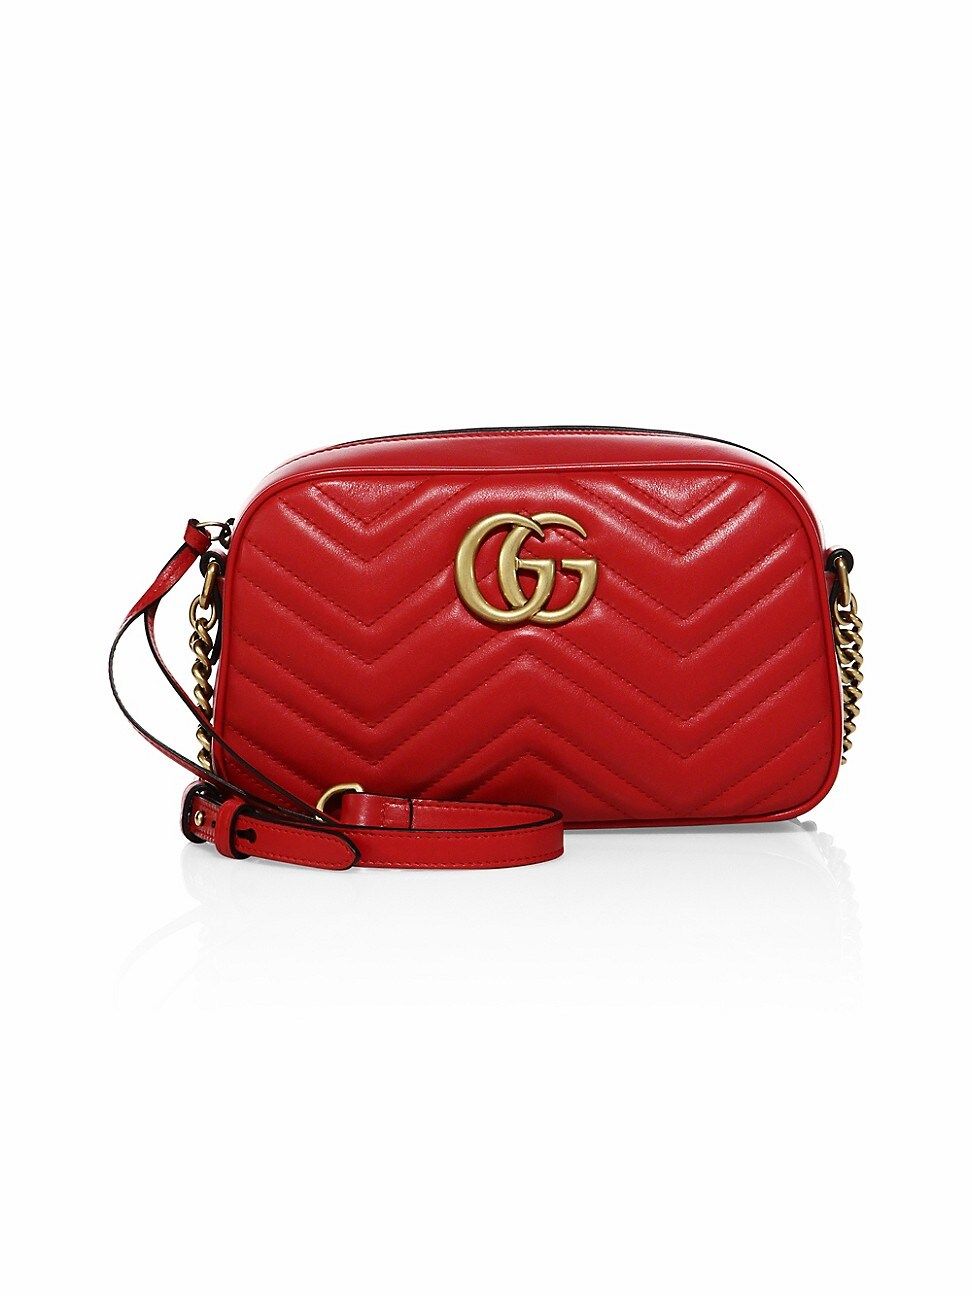 Gucci Women's GG Marmont Small Shoulder Bag - Red | Saks Fifth Avenue